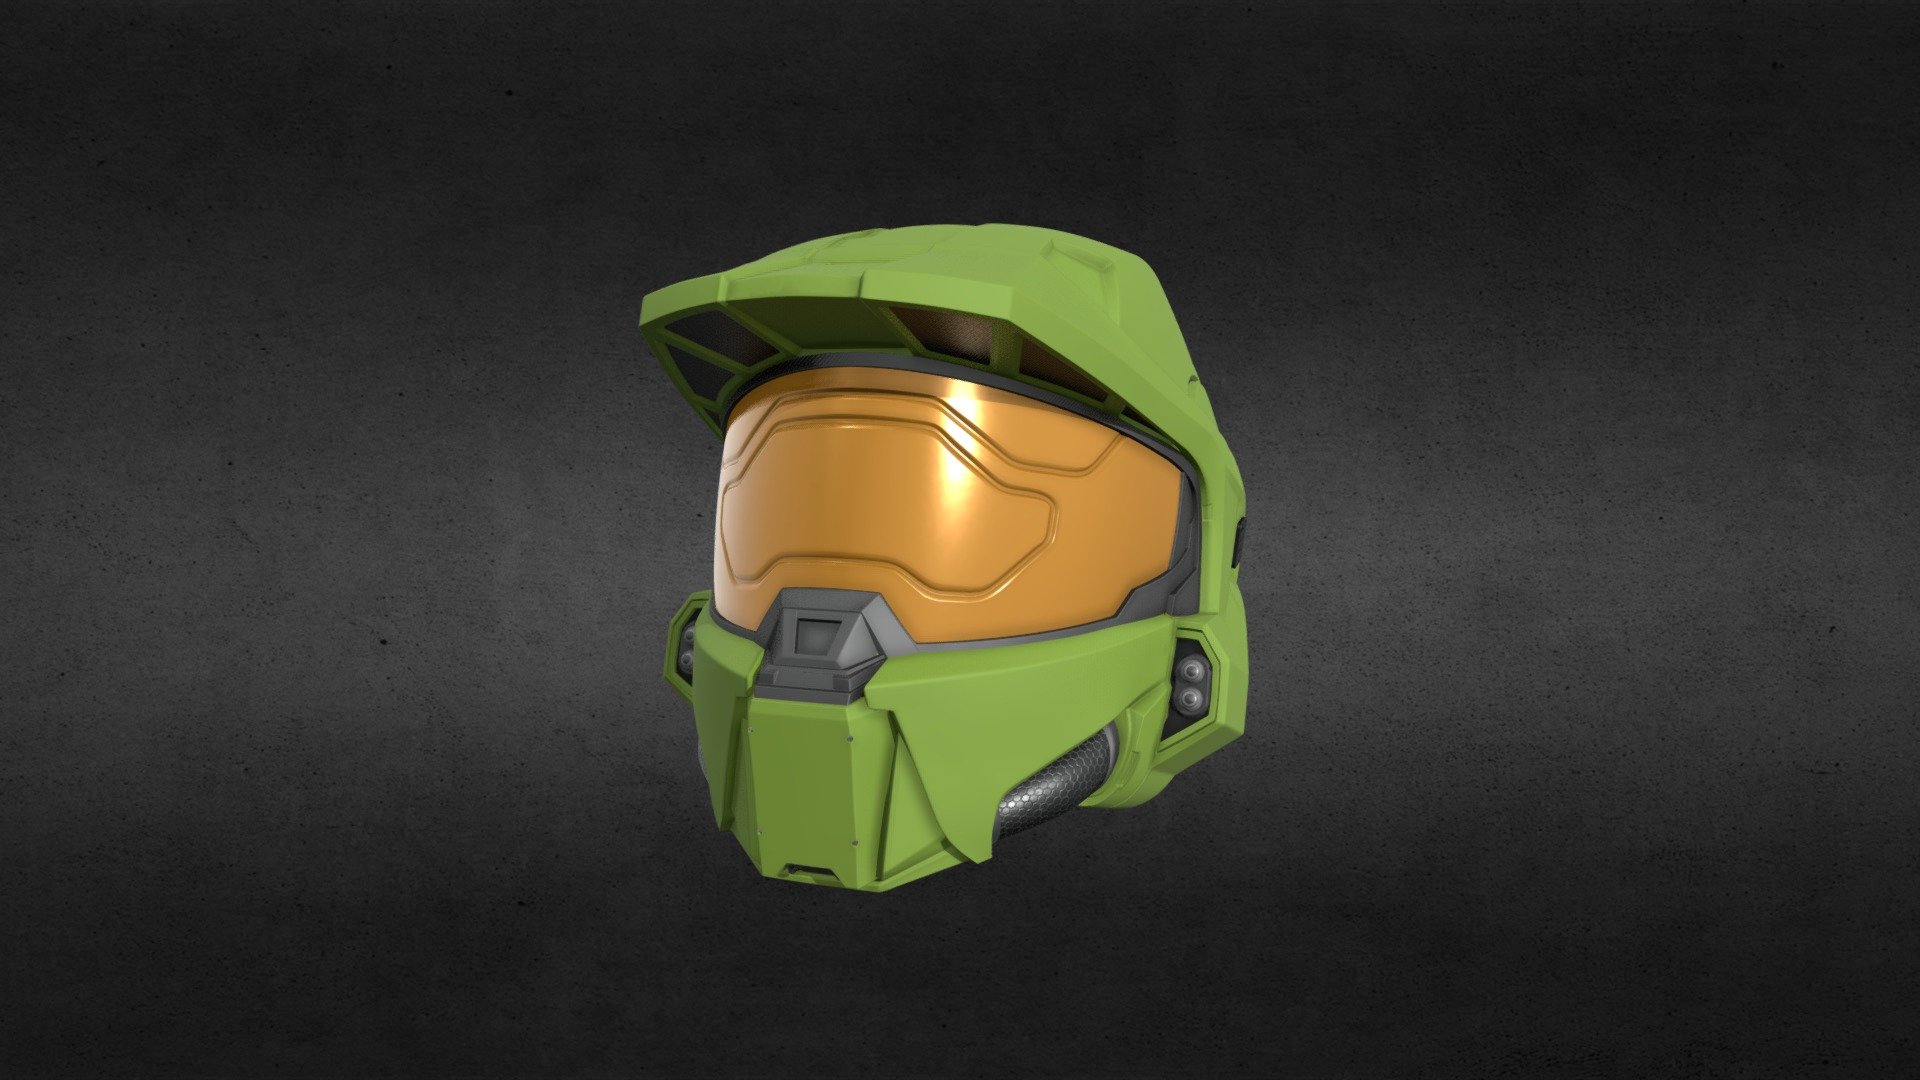 Helmet worn by the protagonist of the Halo franchise Master Chief. Modeled within blender 3.0. Fan project 3d model